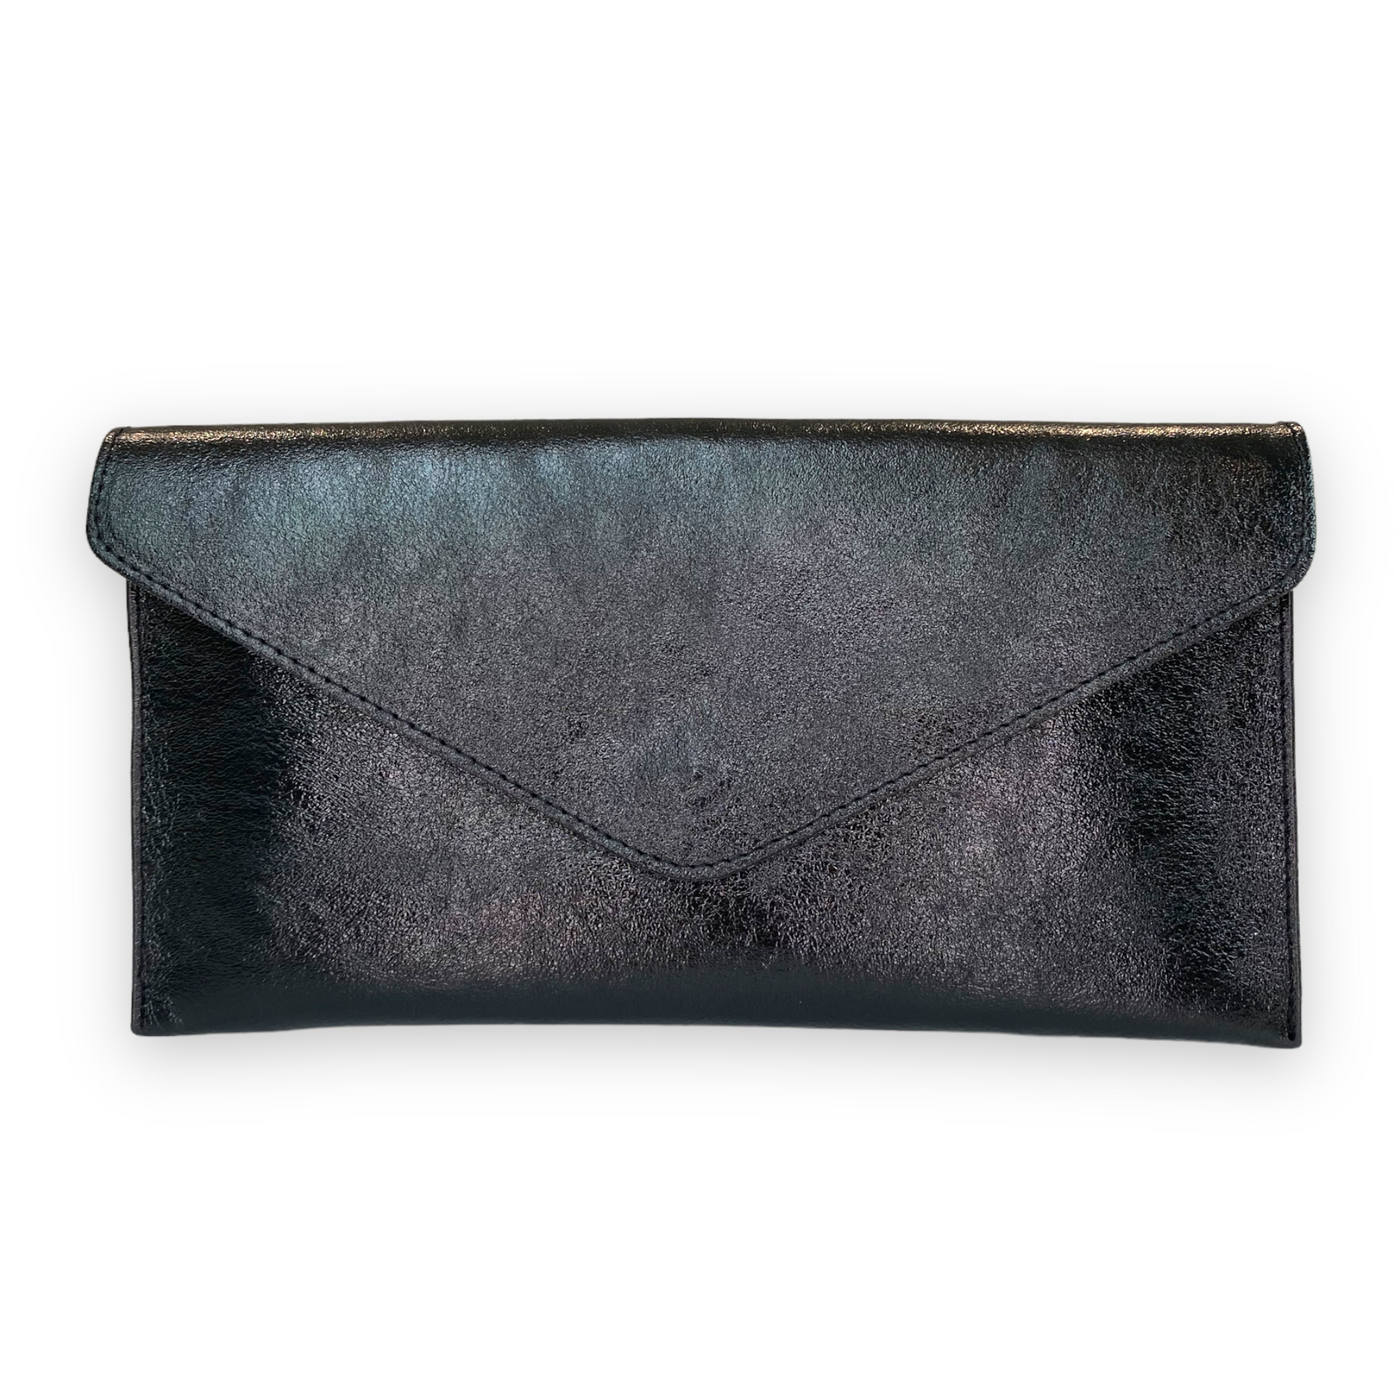 Leather Envelope Clutch Inc Chain Crossbody Strap - Pink Waters 